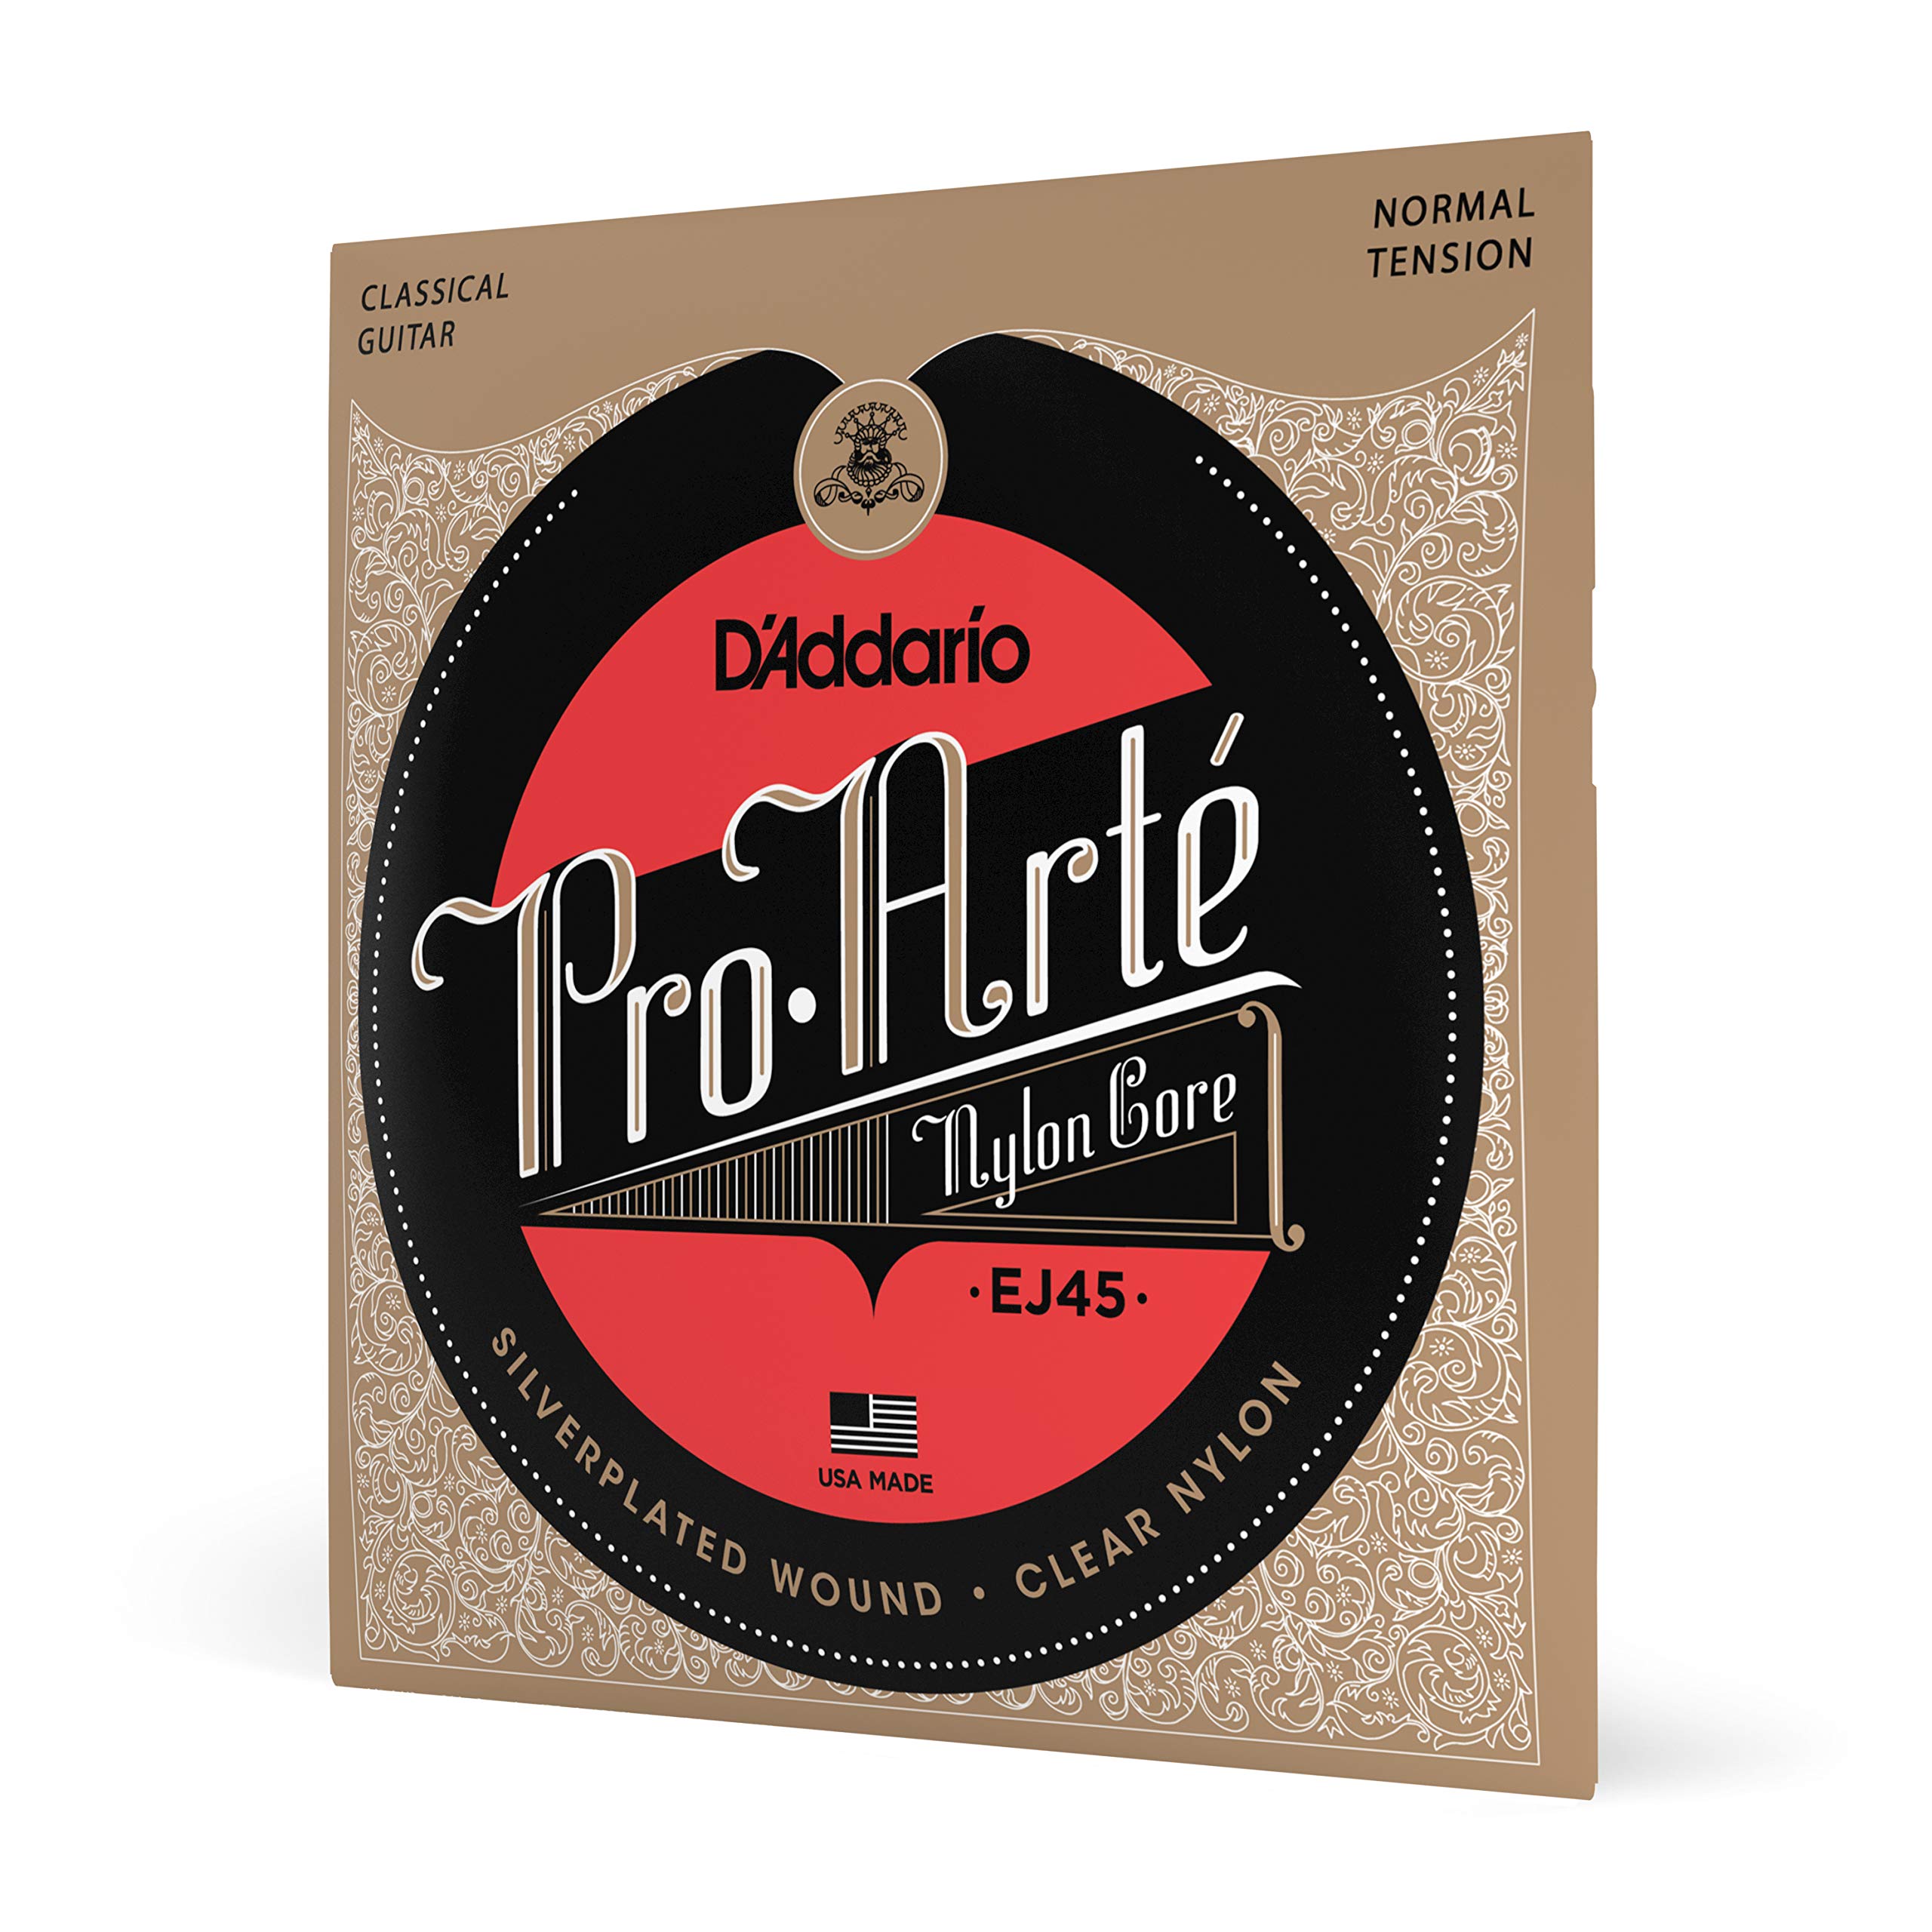 Book Cover D'Addario Guitar Strings - Pro-Arte Classical Guitar Strings - EJ45 - Nylon Guitar Strings - Silver Plated Wound, Nylon Core - Normal Tension, 1-Pack Normal Tension 1-Pack